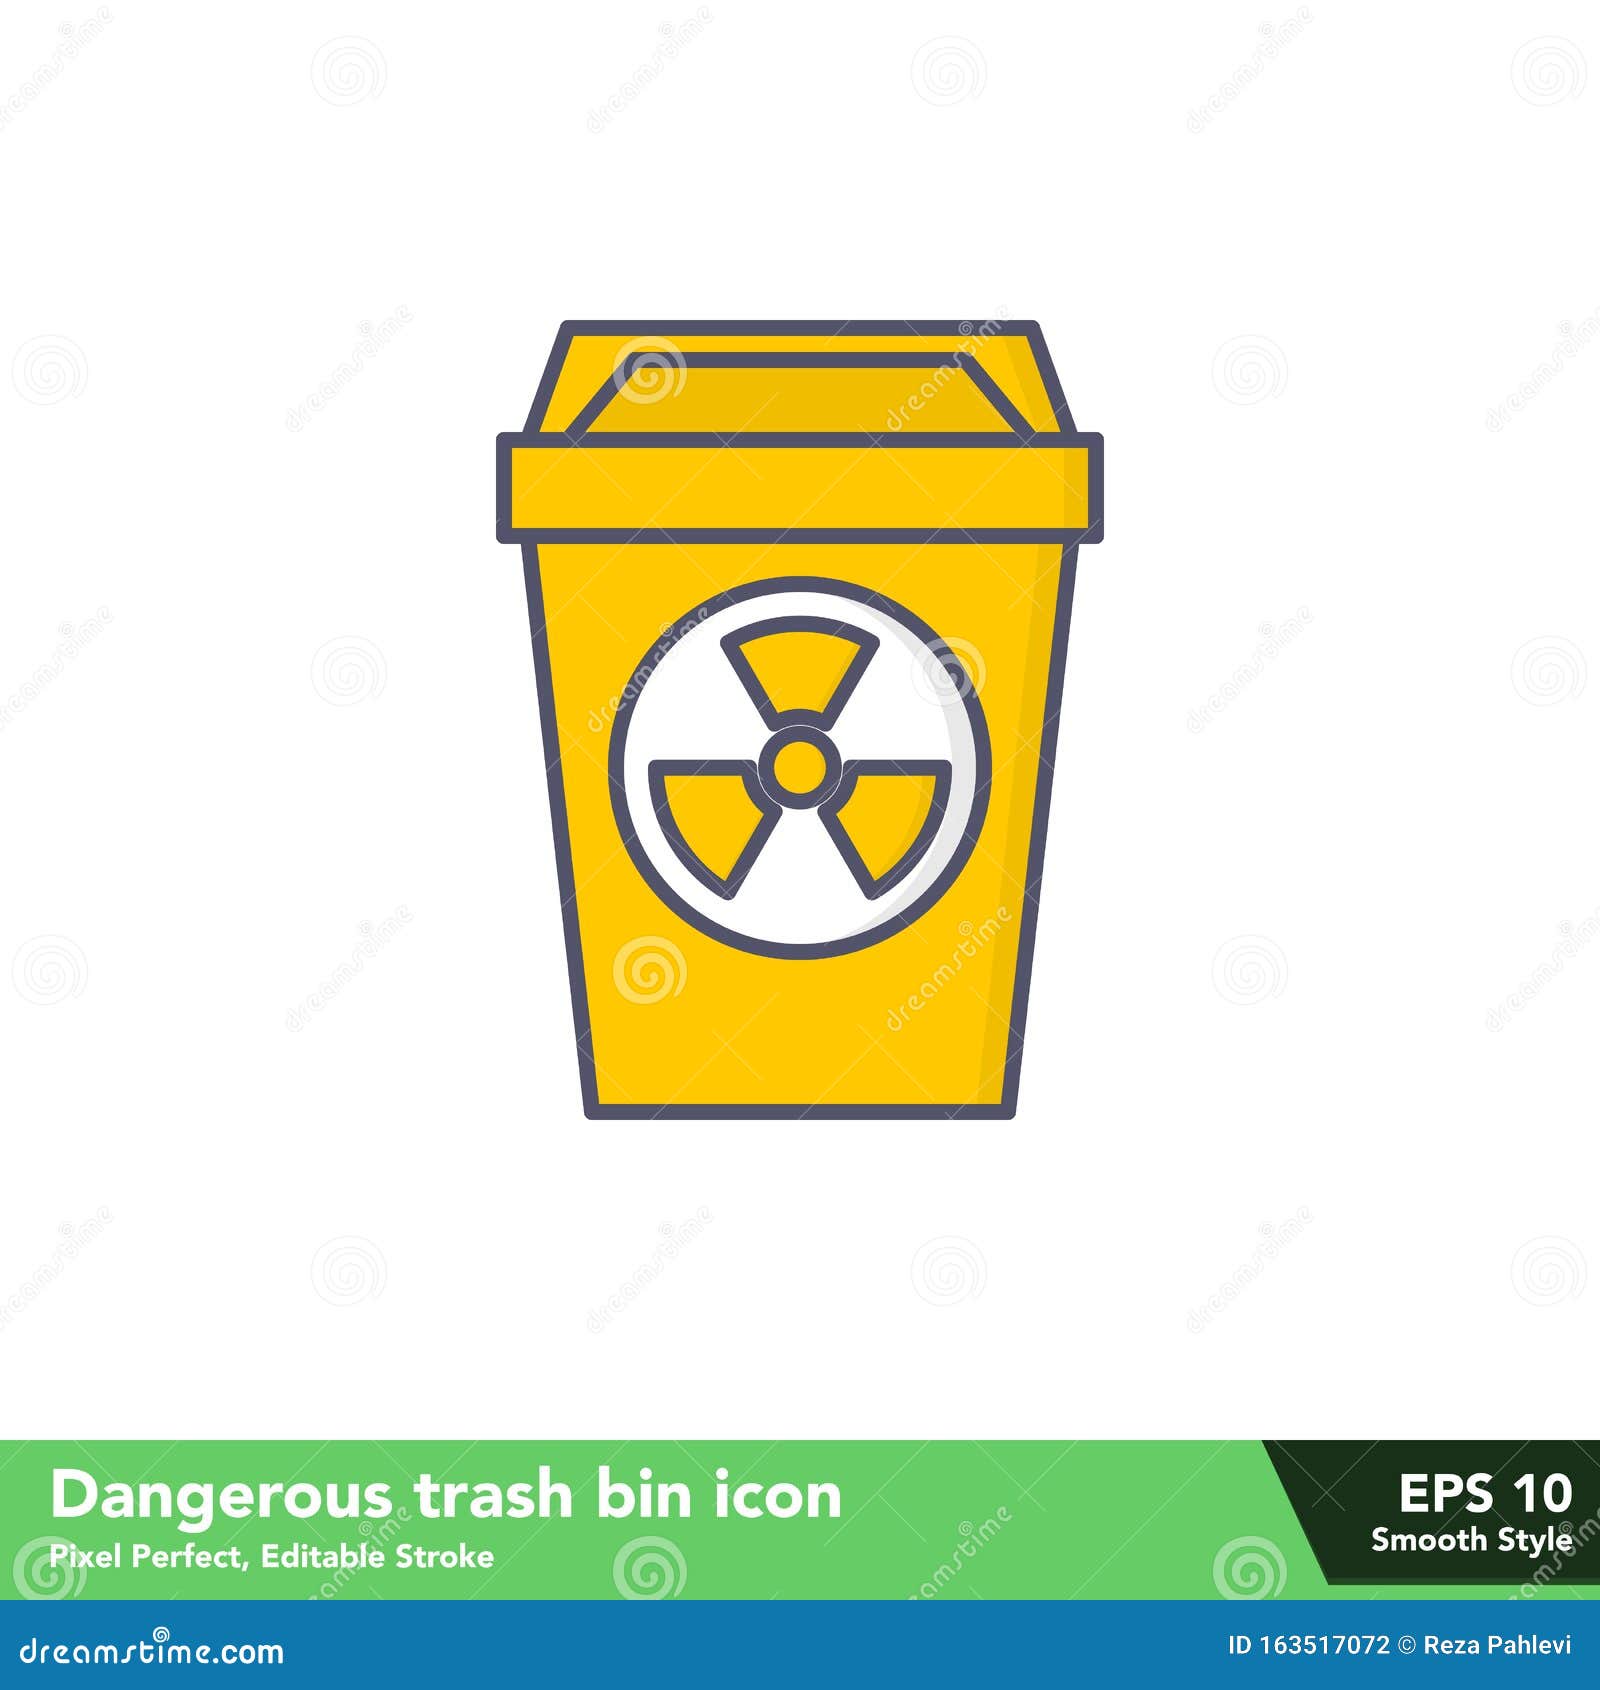 Dangerous Trash Bin Icon In Smooth Style With Pixel Perfect And Stroke Eps 10 Stock Illustration Illustration Of Dustbin Garbage